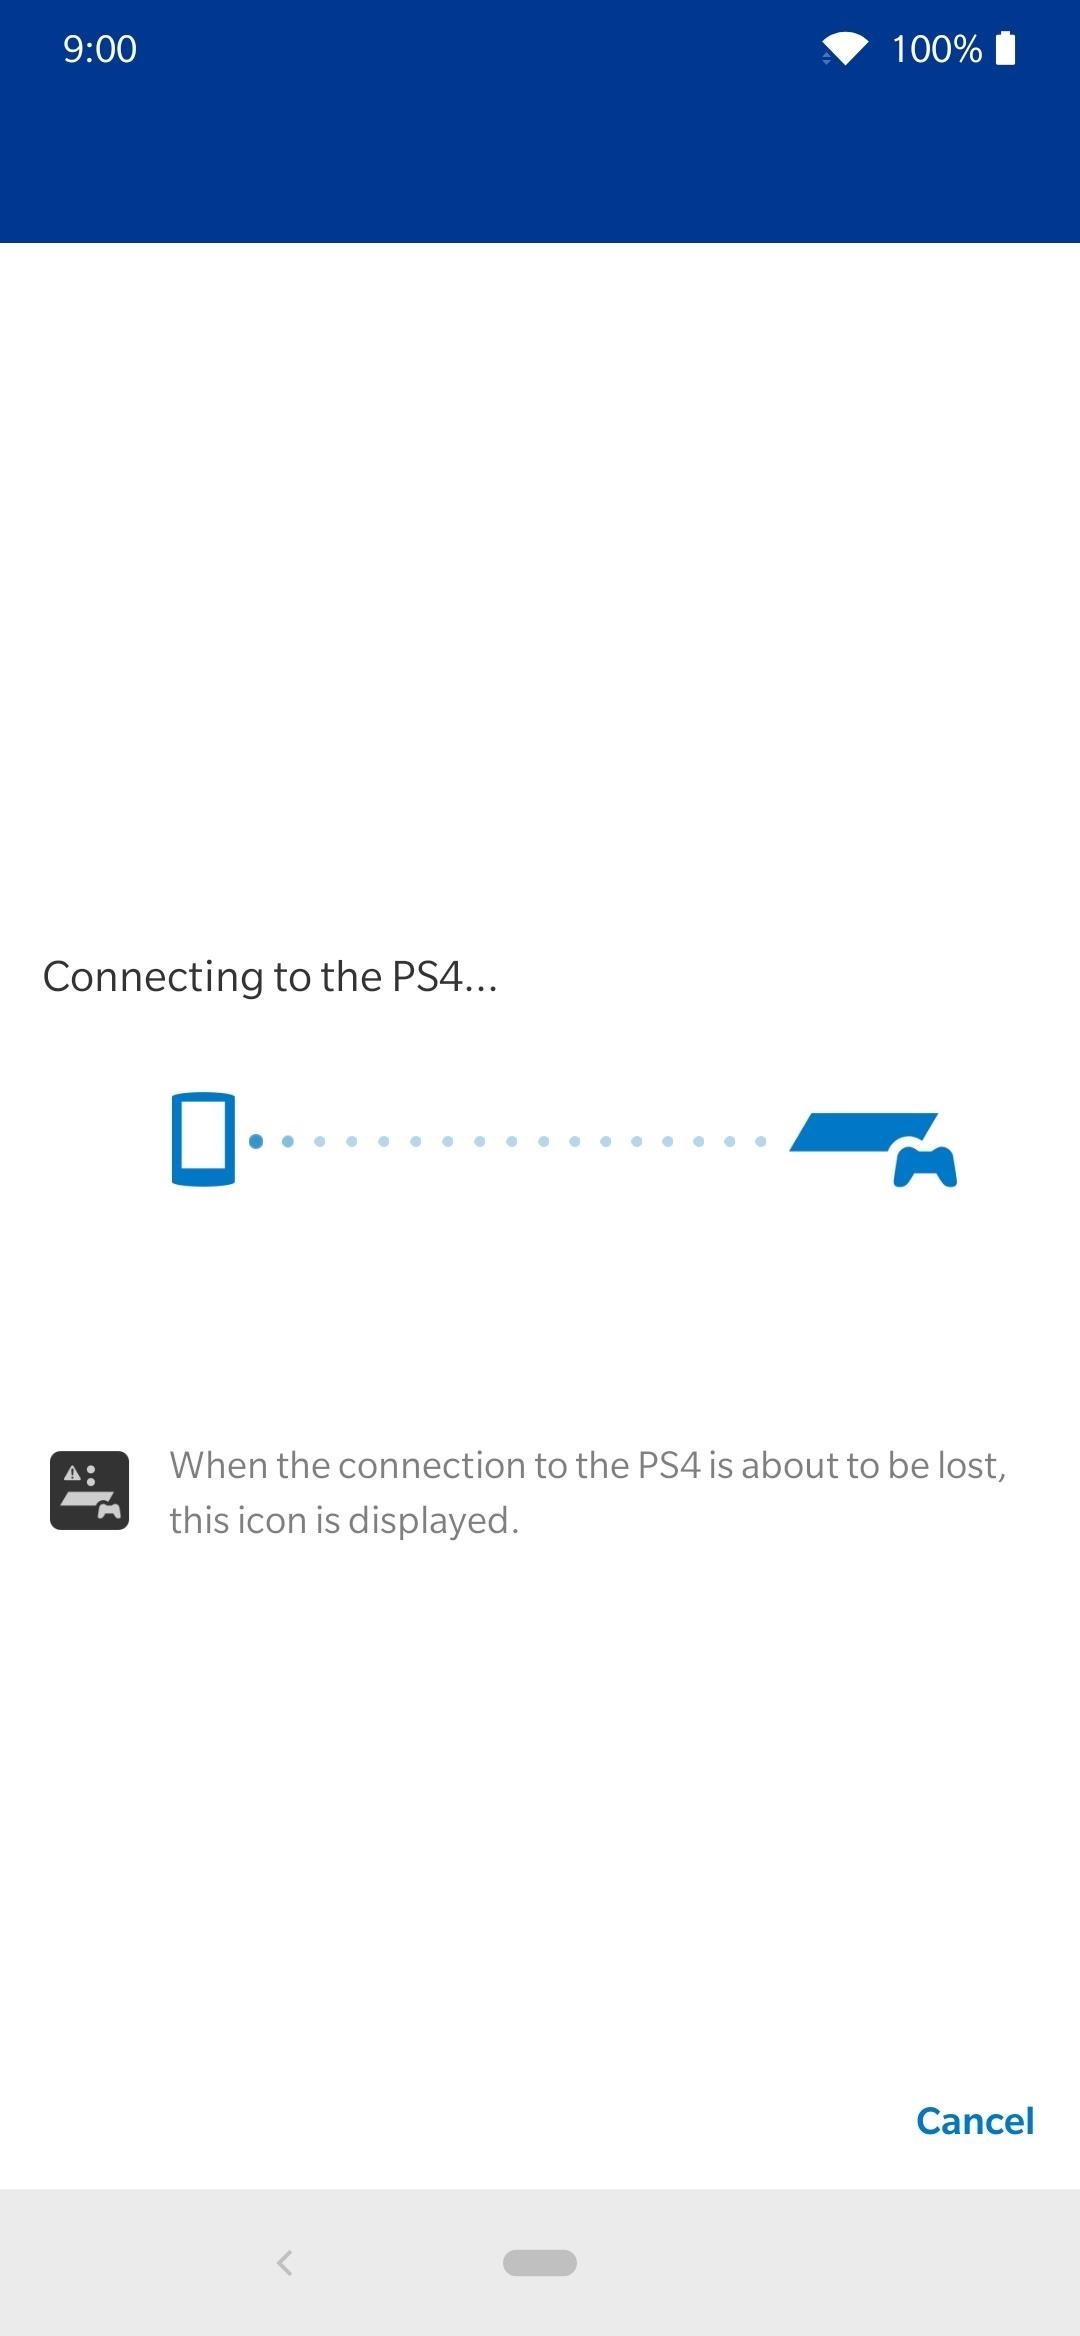 How to Play Your Favorite PS4 Games Remotely on Any Android Device